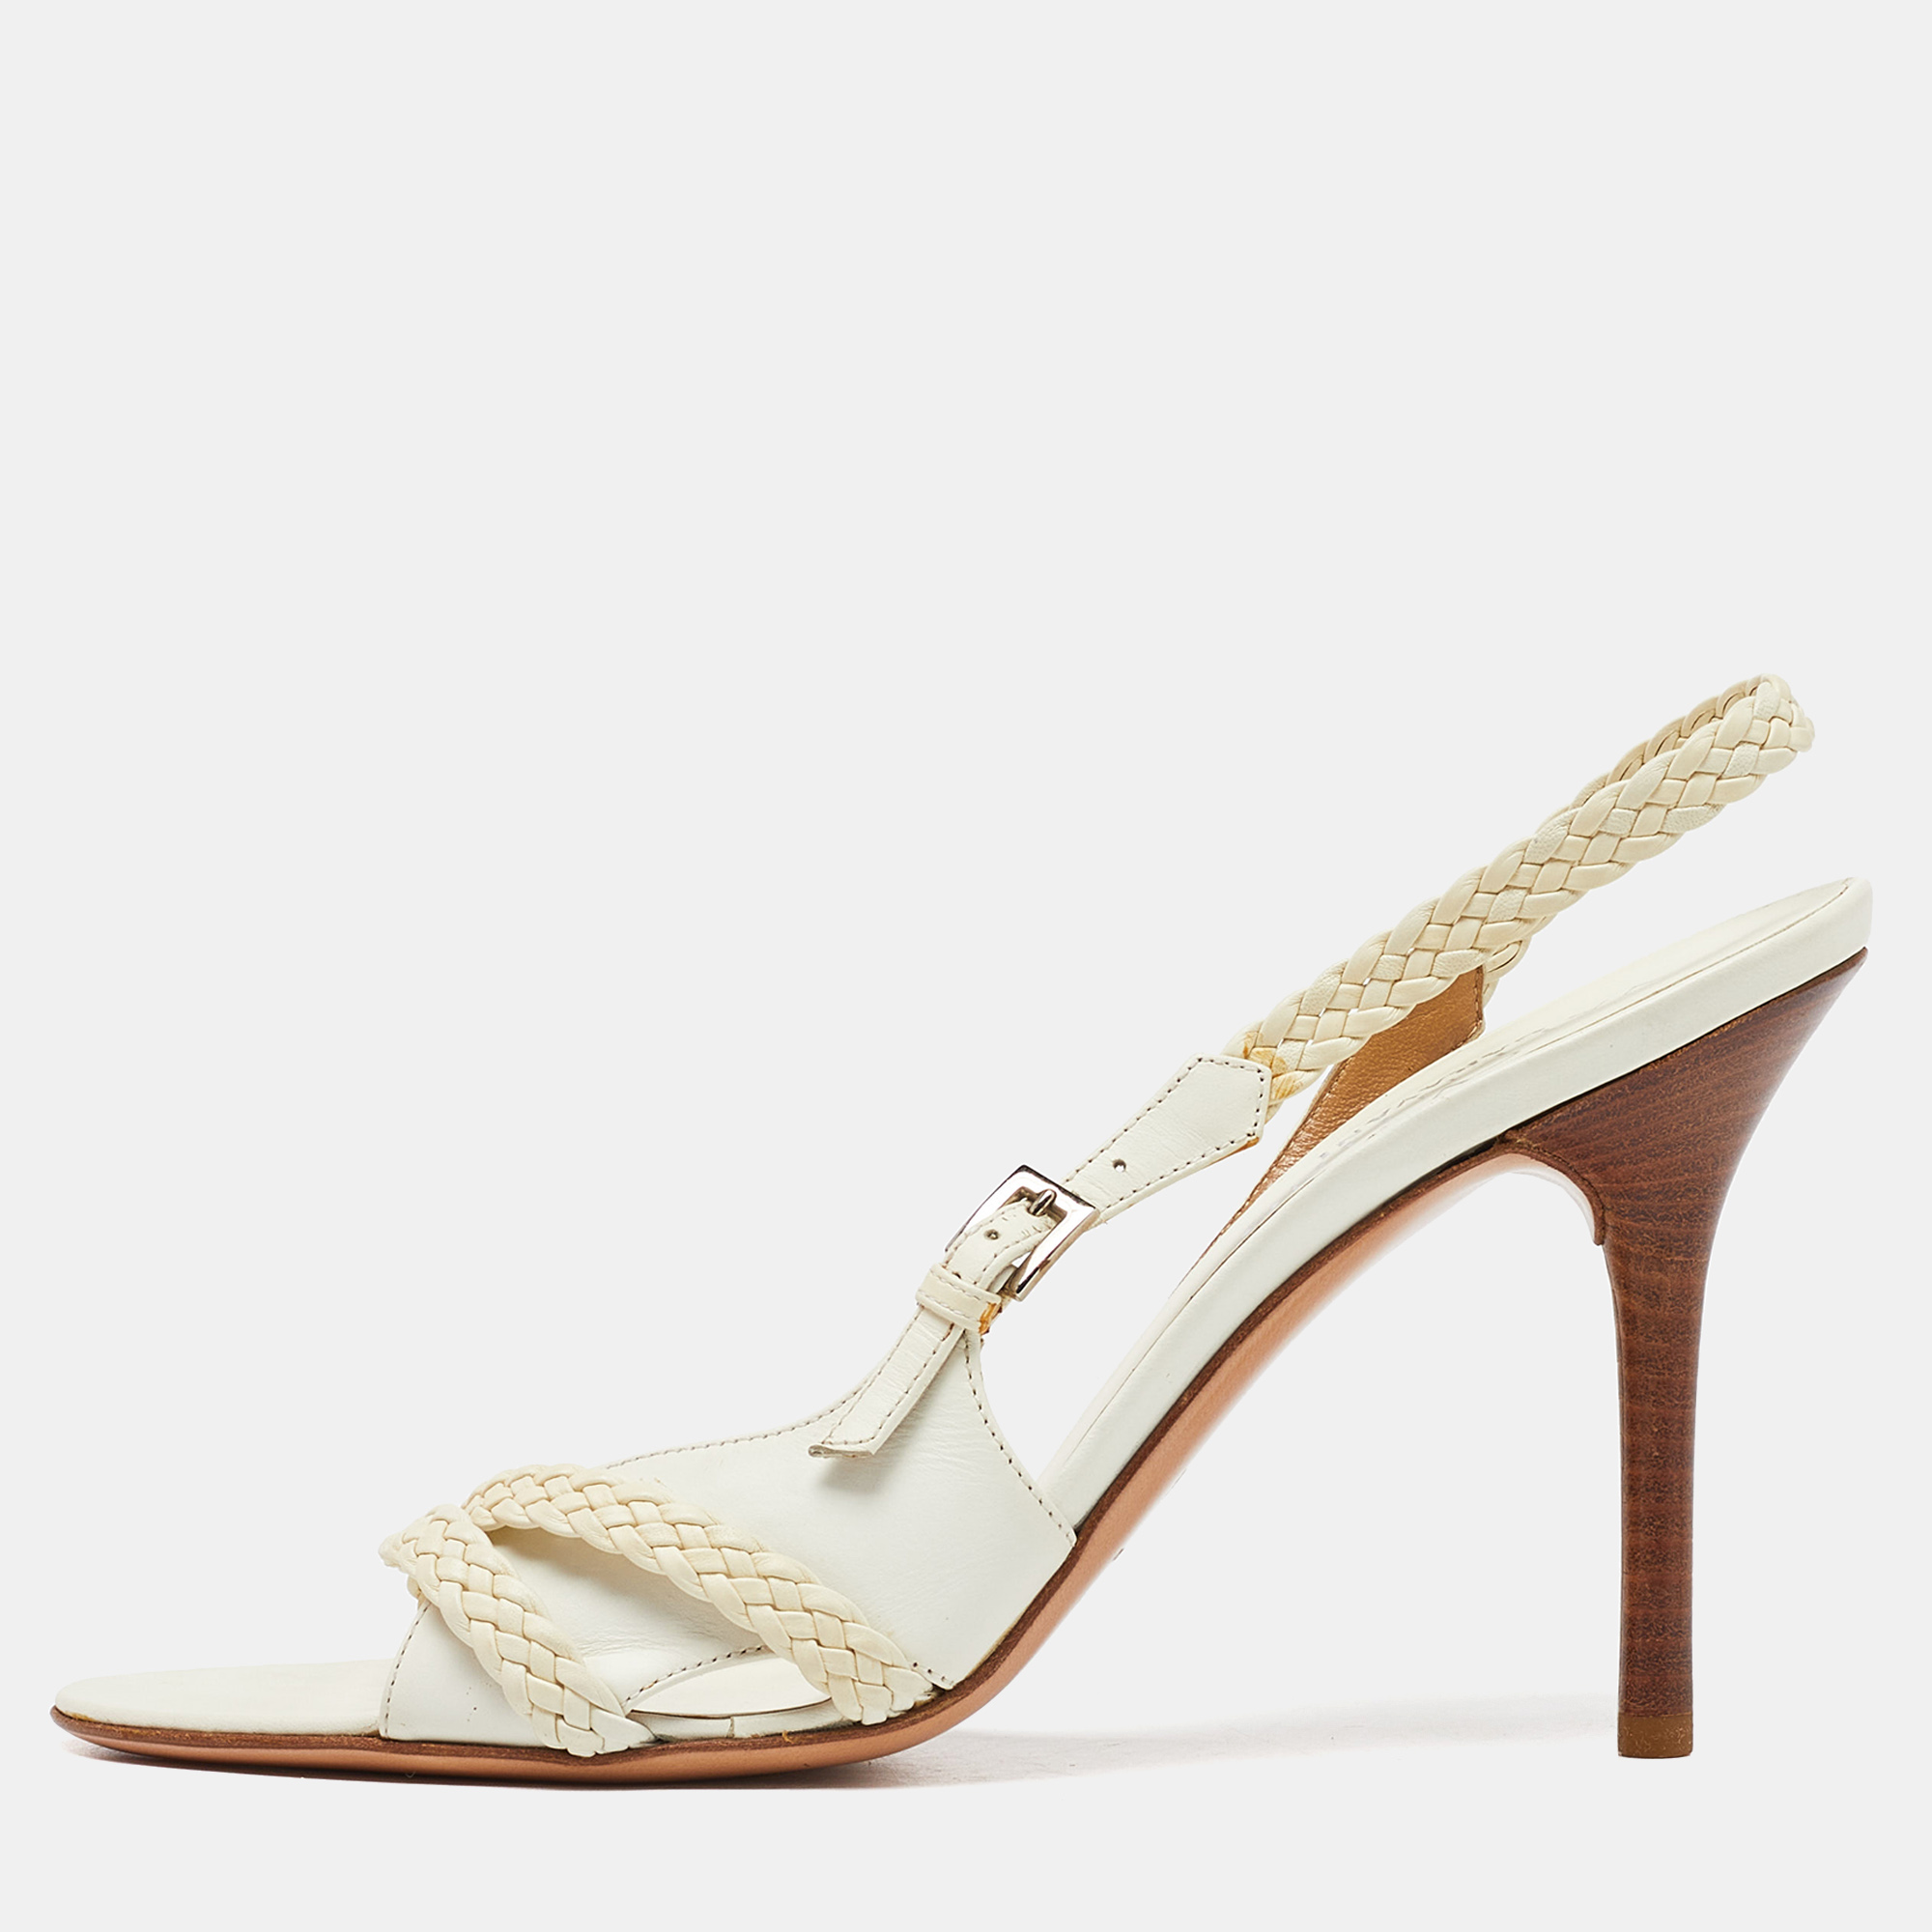 Valentino white woven leather slingback sandals size 39.5